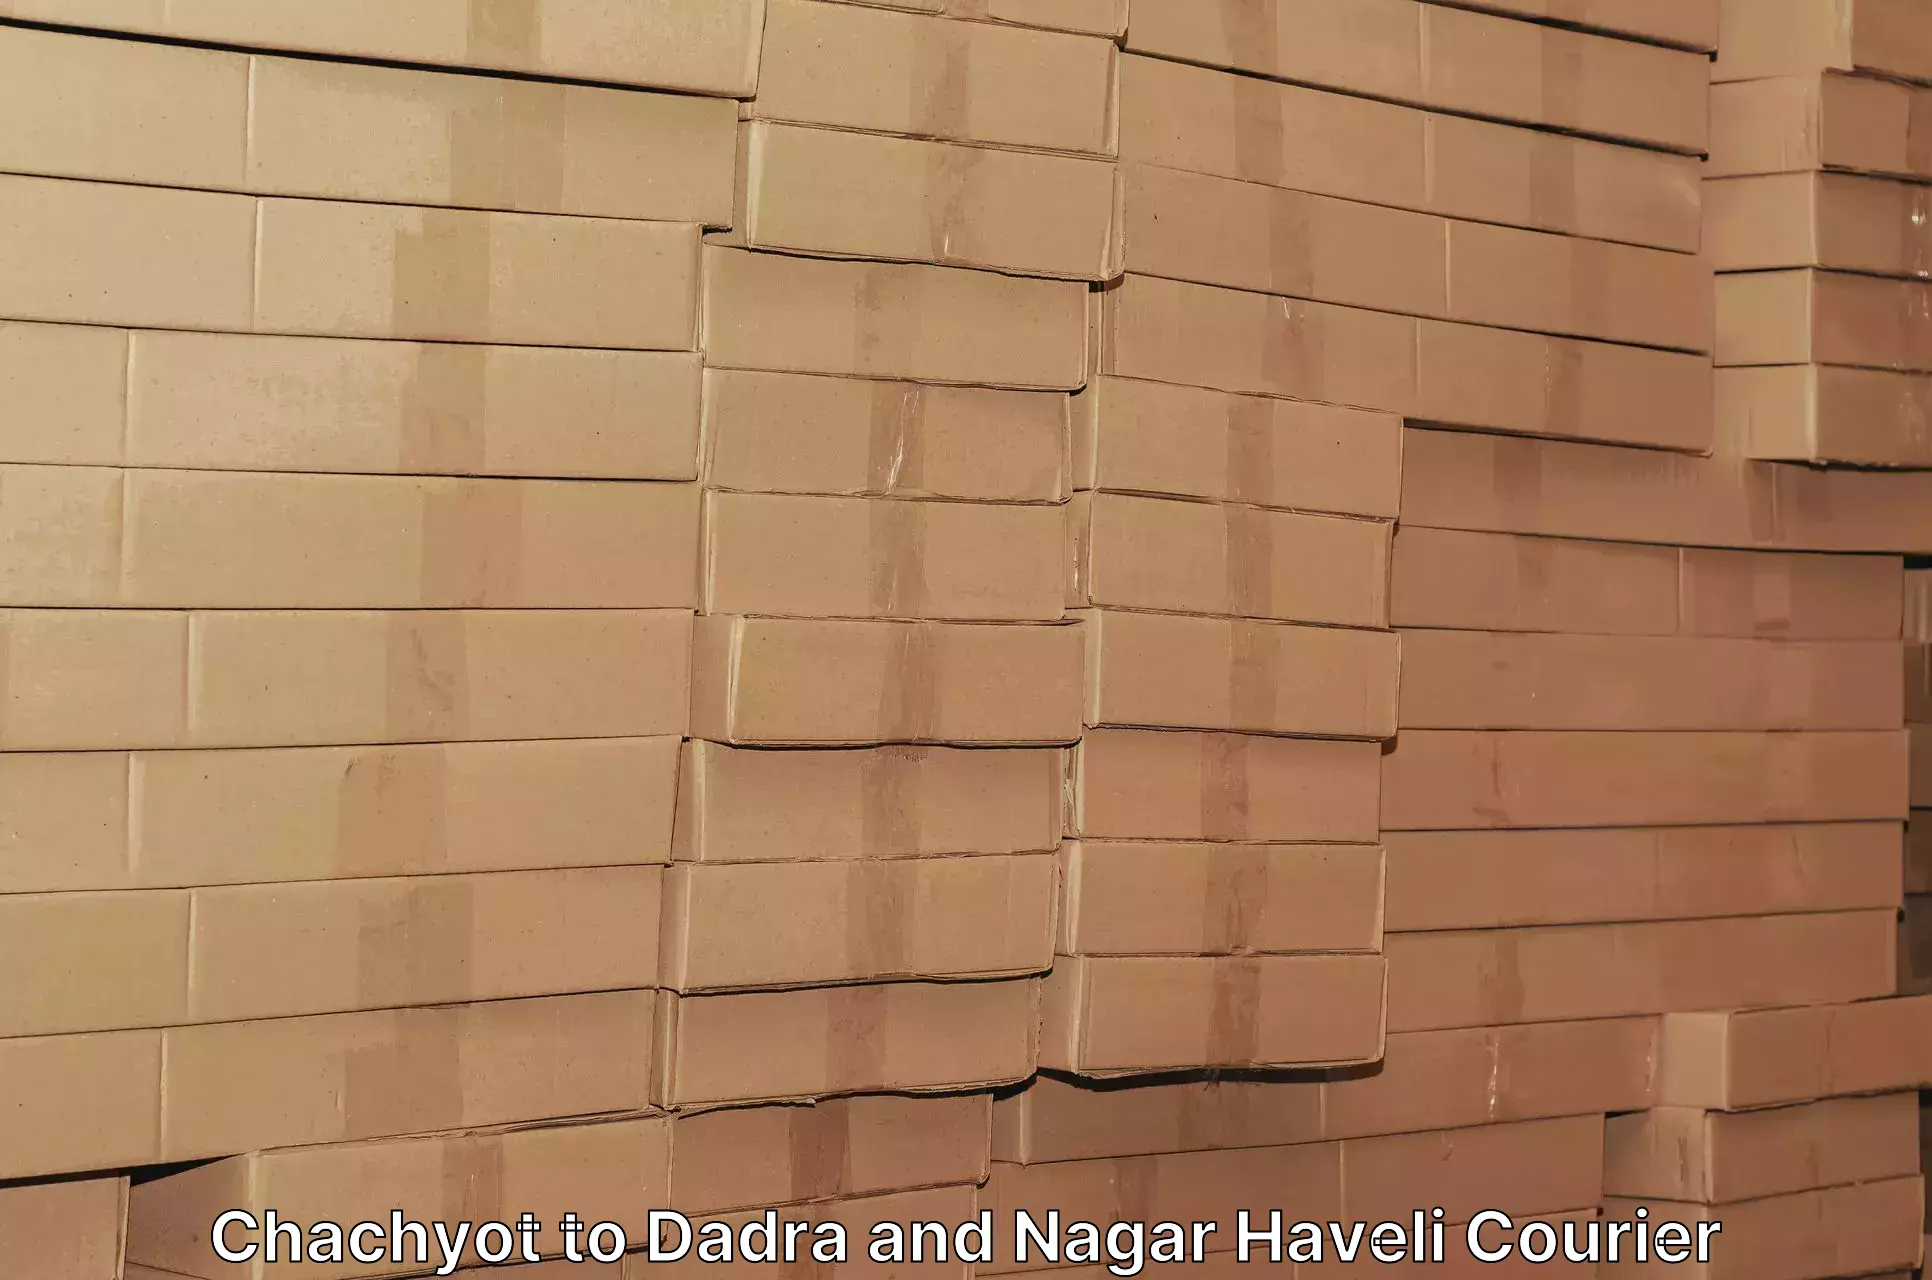 Courier service partnerships Chachyot to Dadra and Nagar Haveli